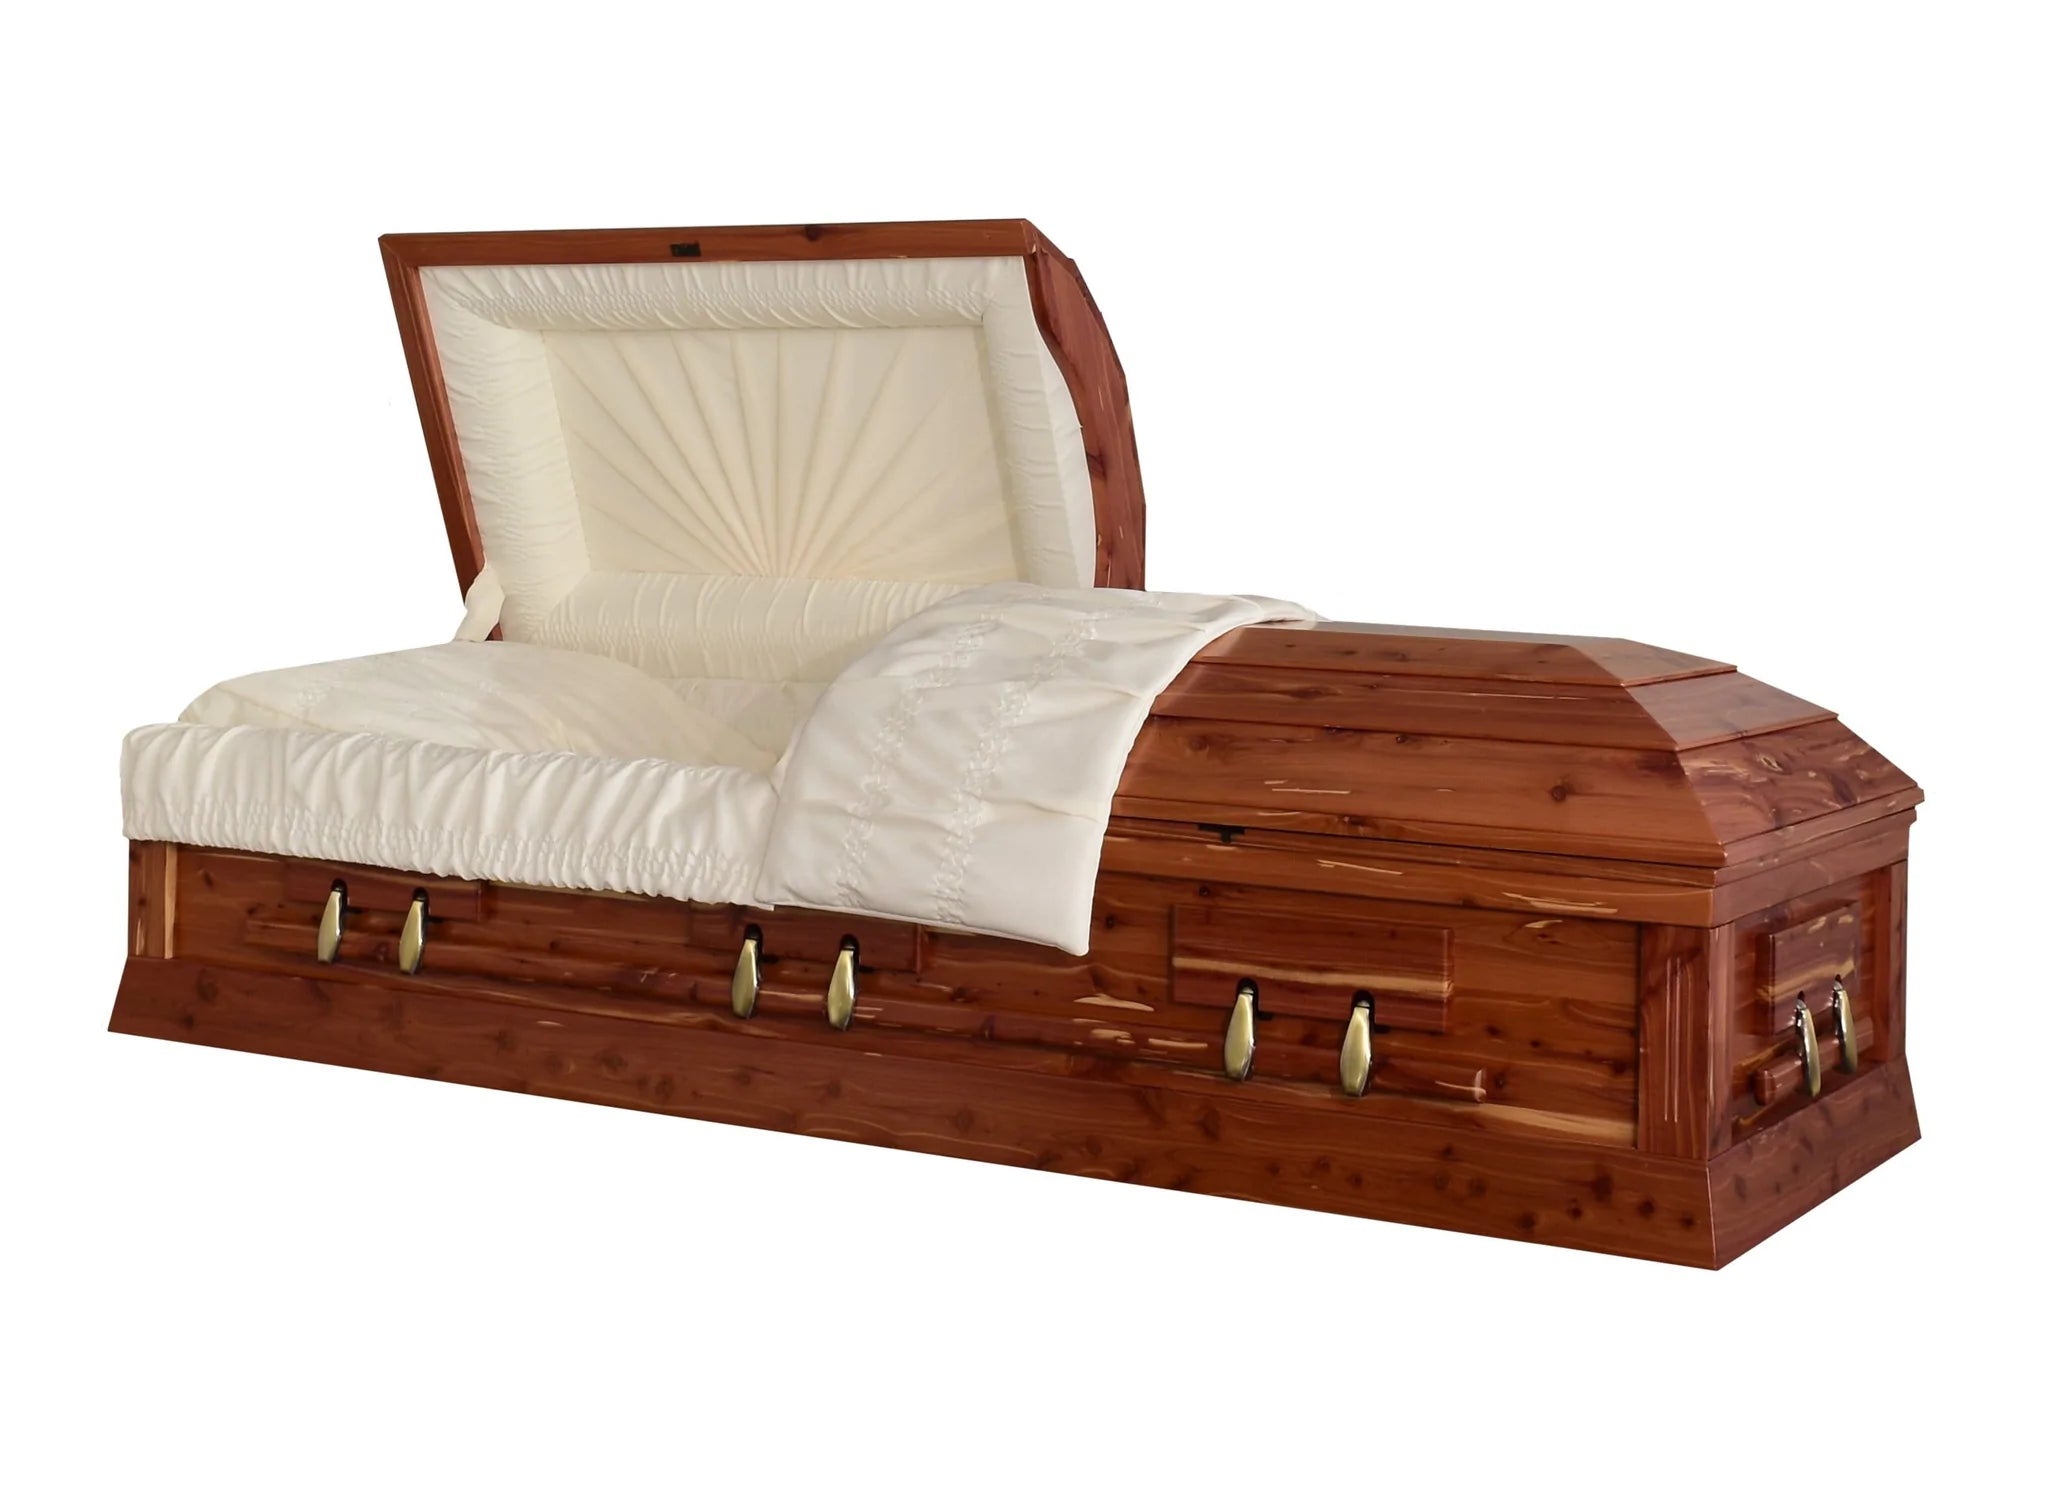 Everything You Need To Know About Cedar Caskets